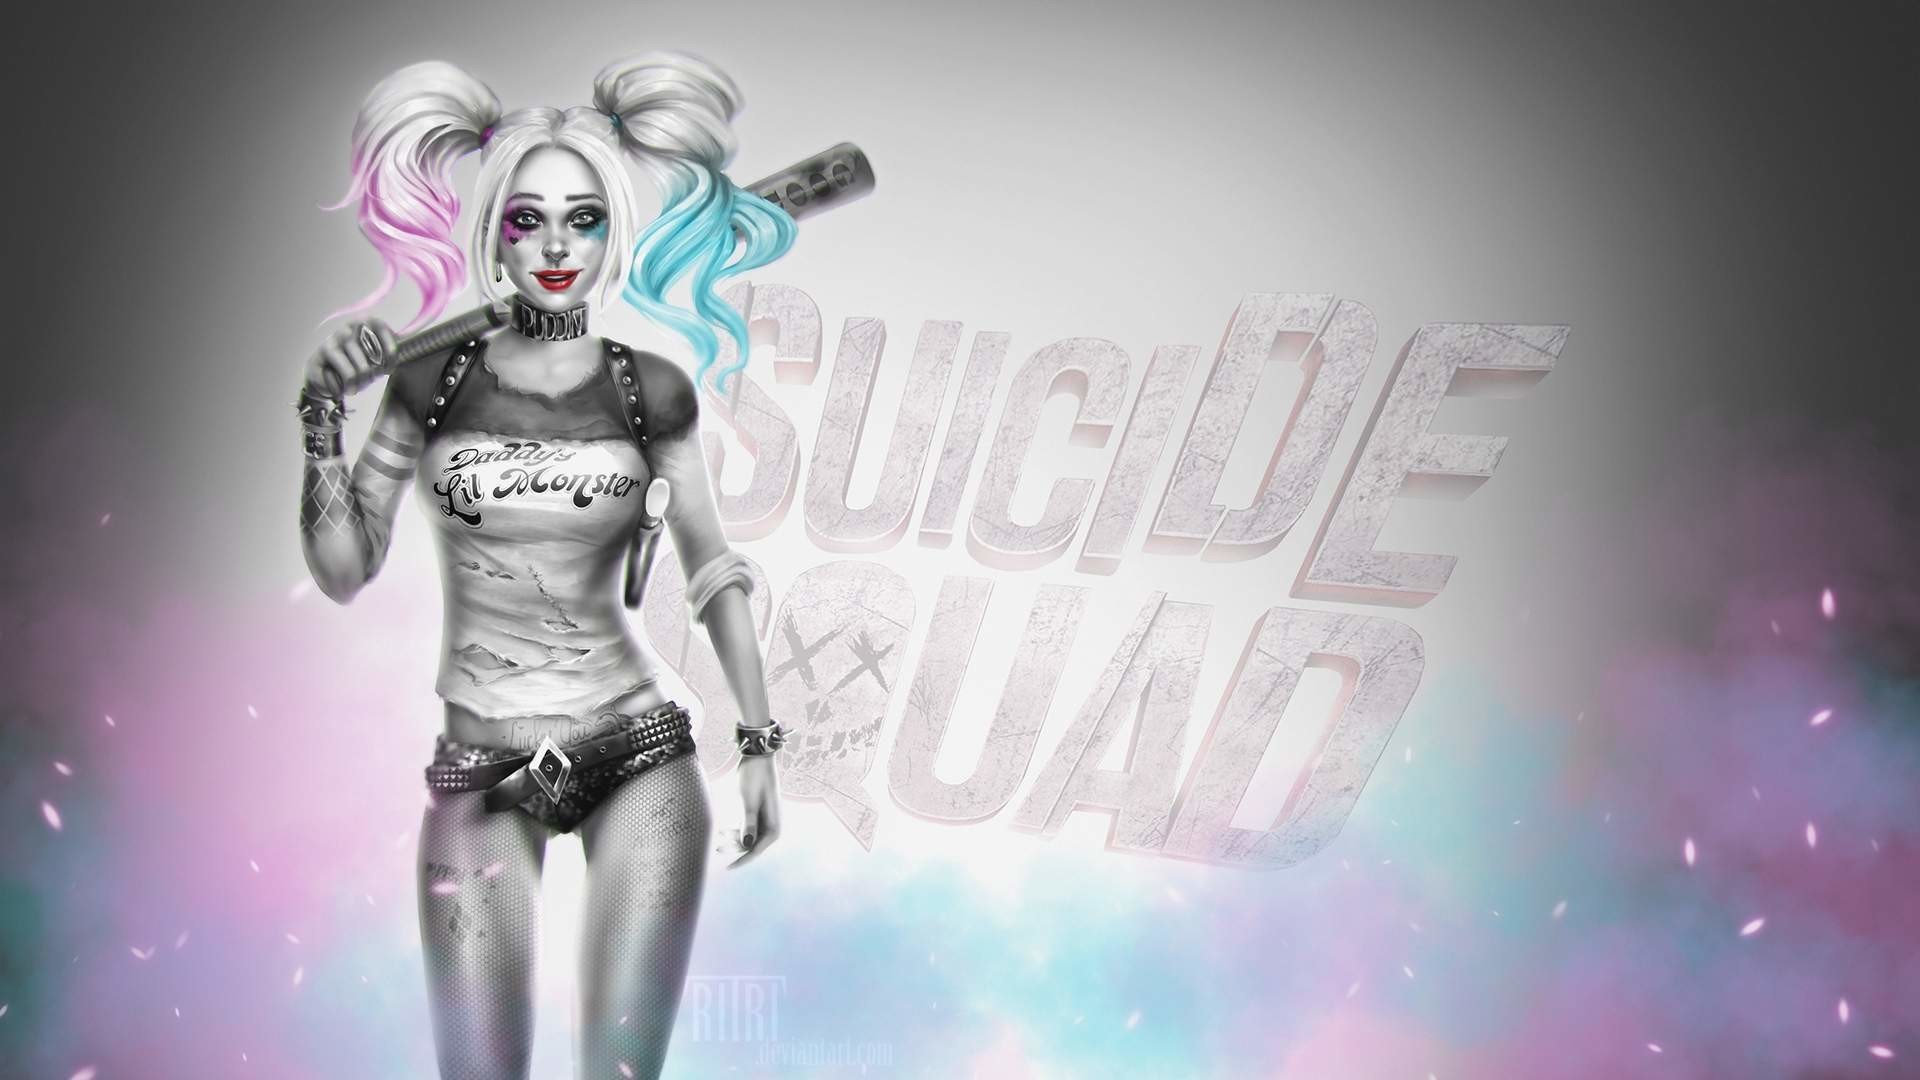 1920x1080 Suicide Squad Harley Quinn Wallpaper